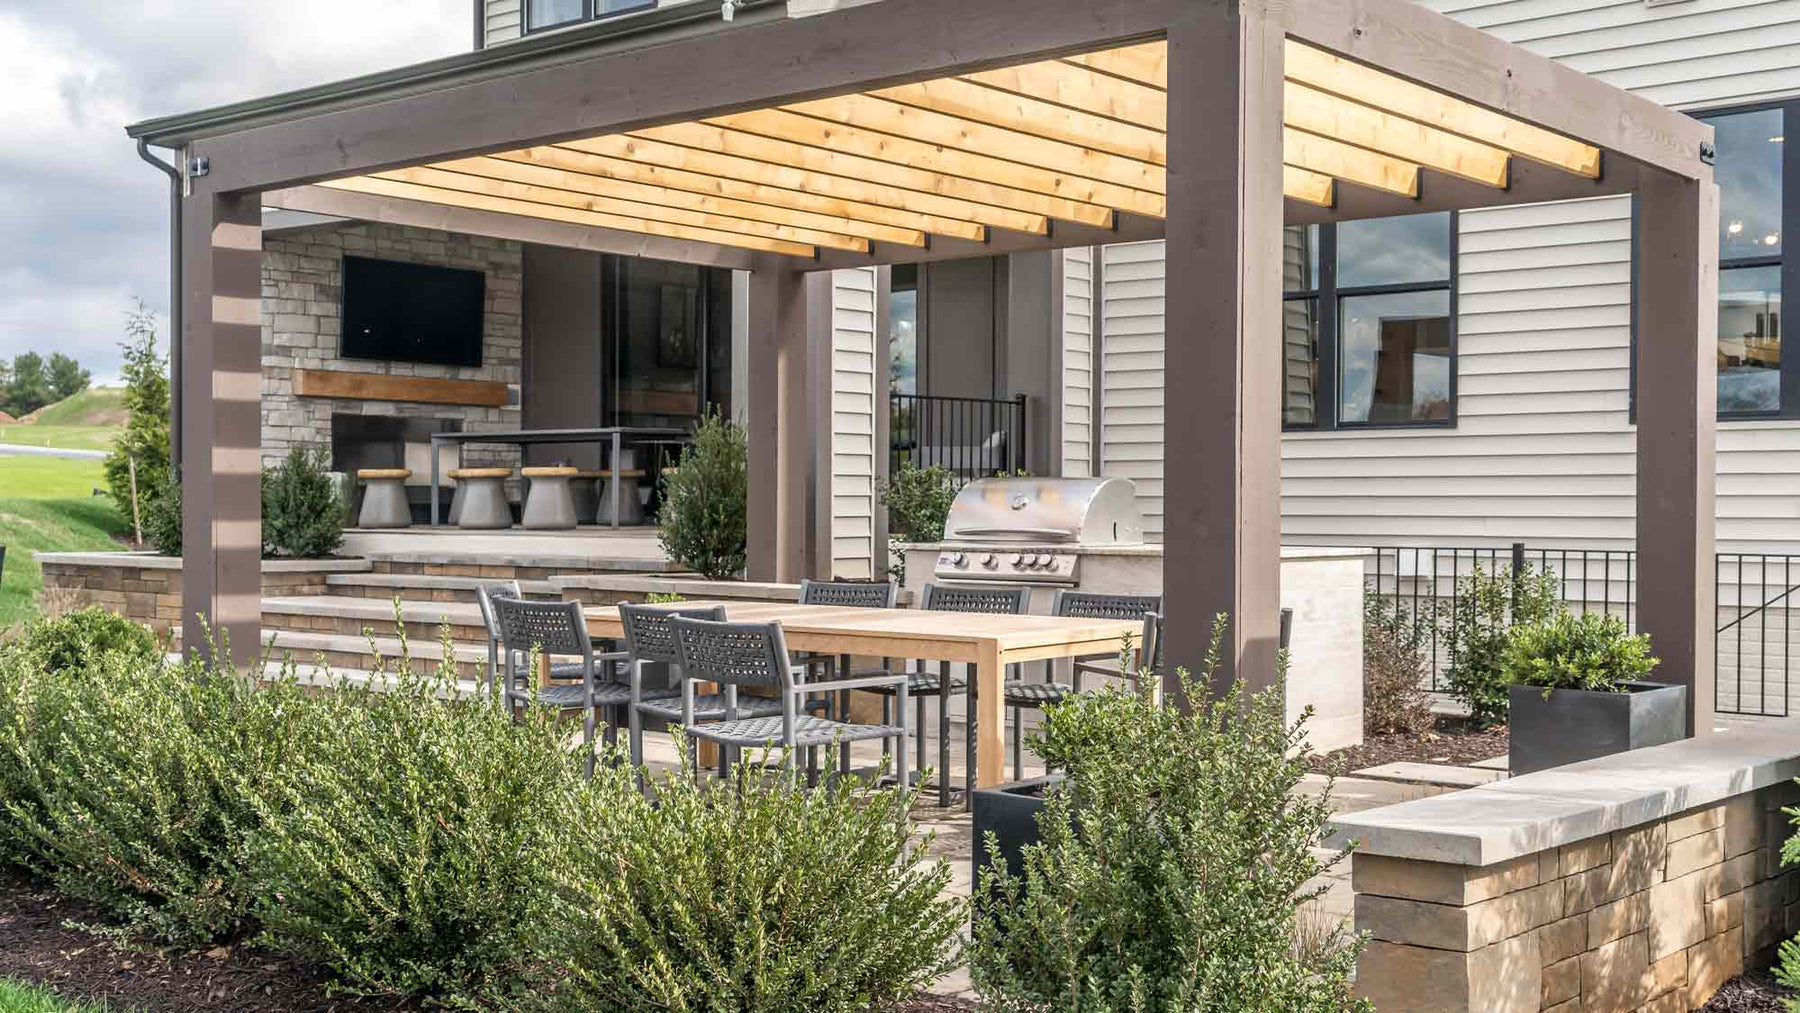 How to Choose The Right Tiles For Your Outdoor Kitchen